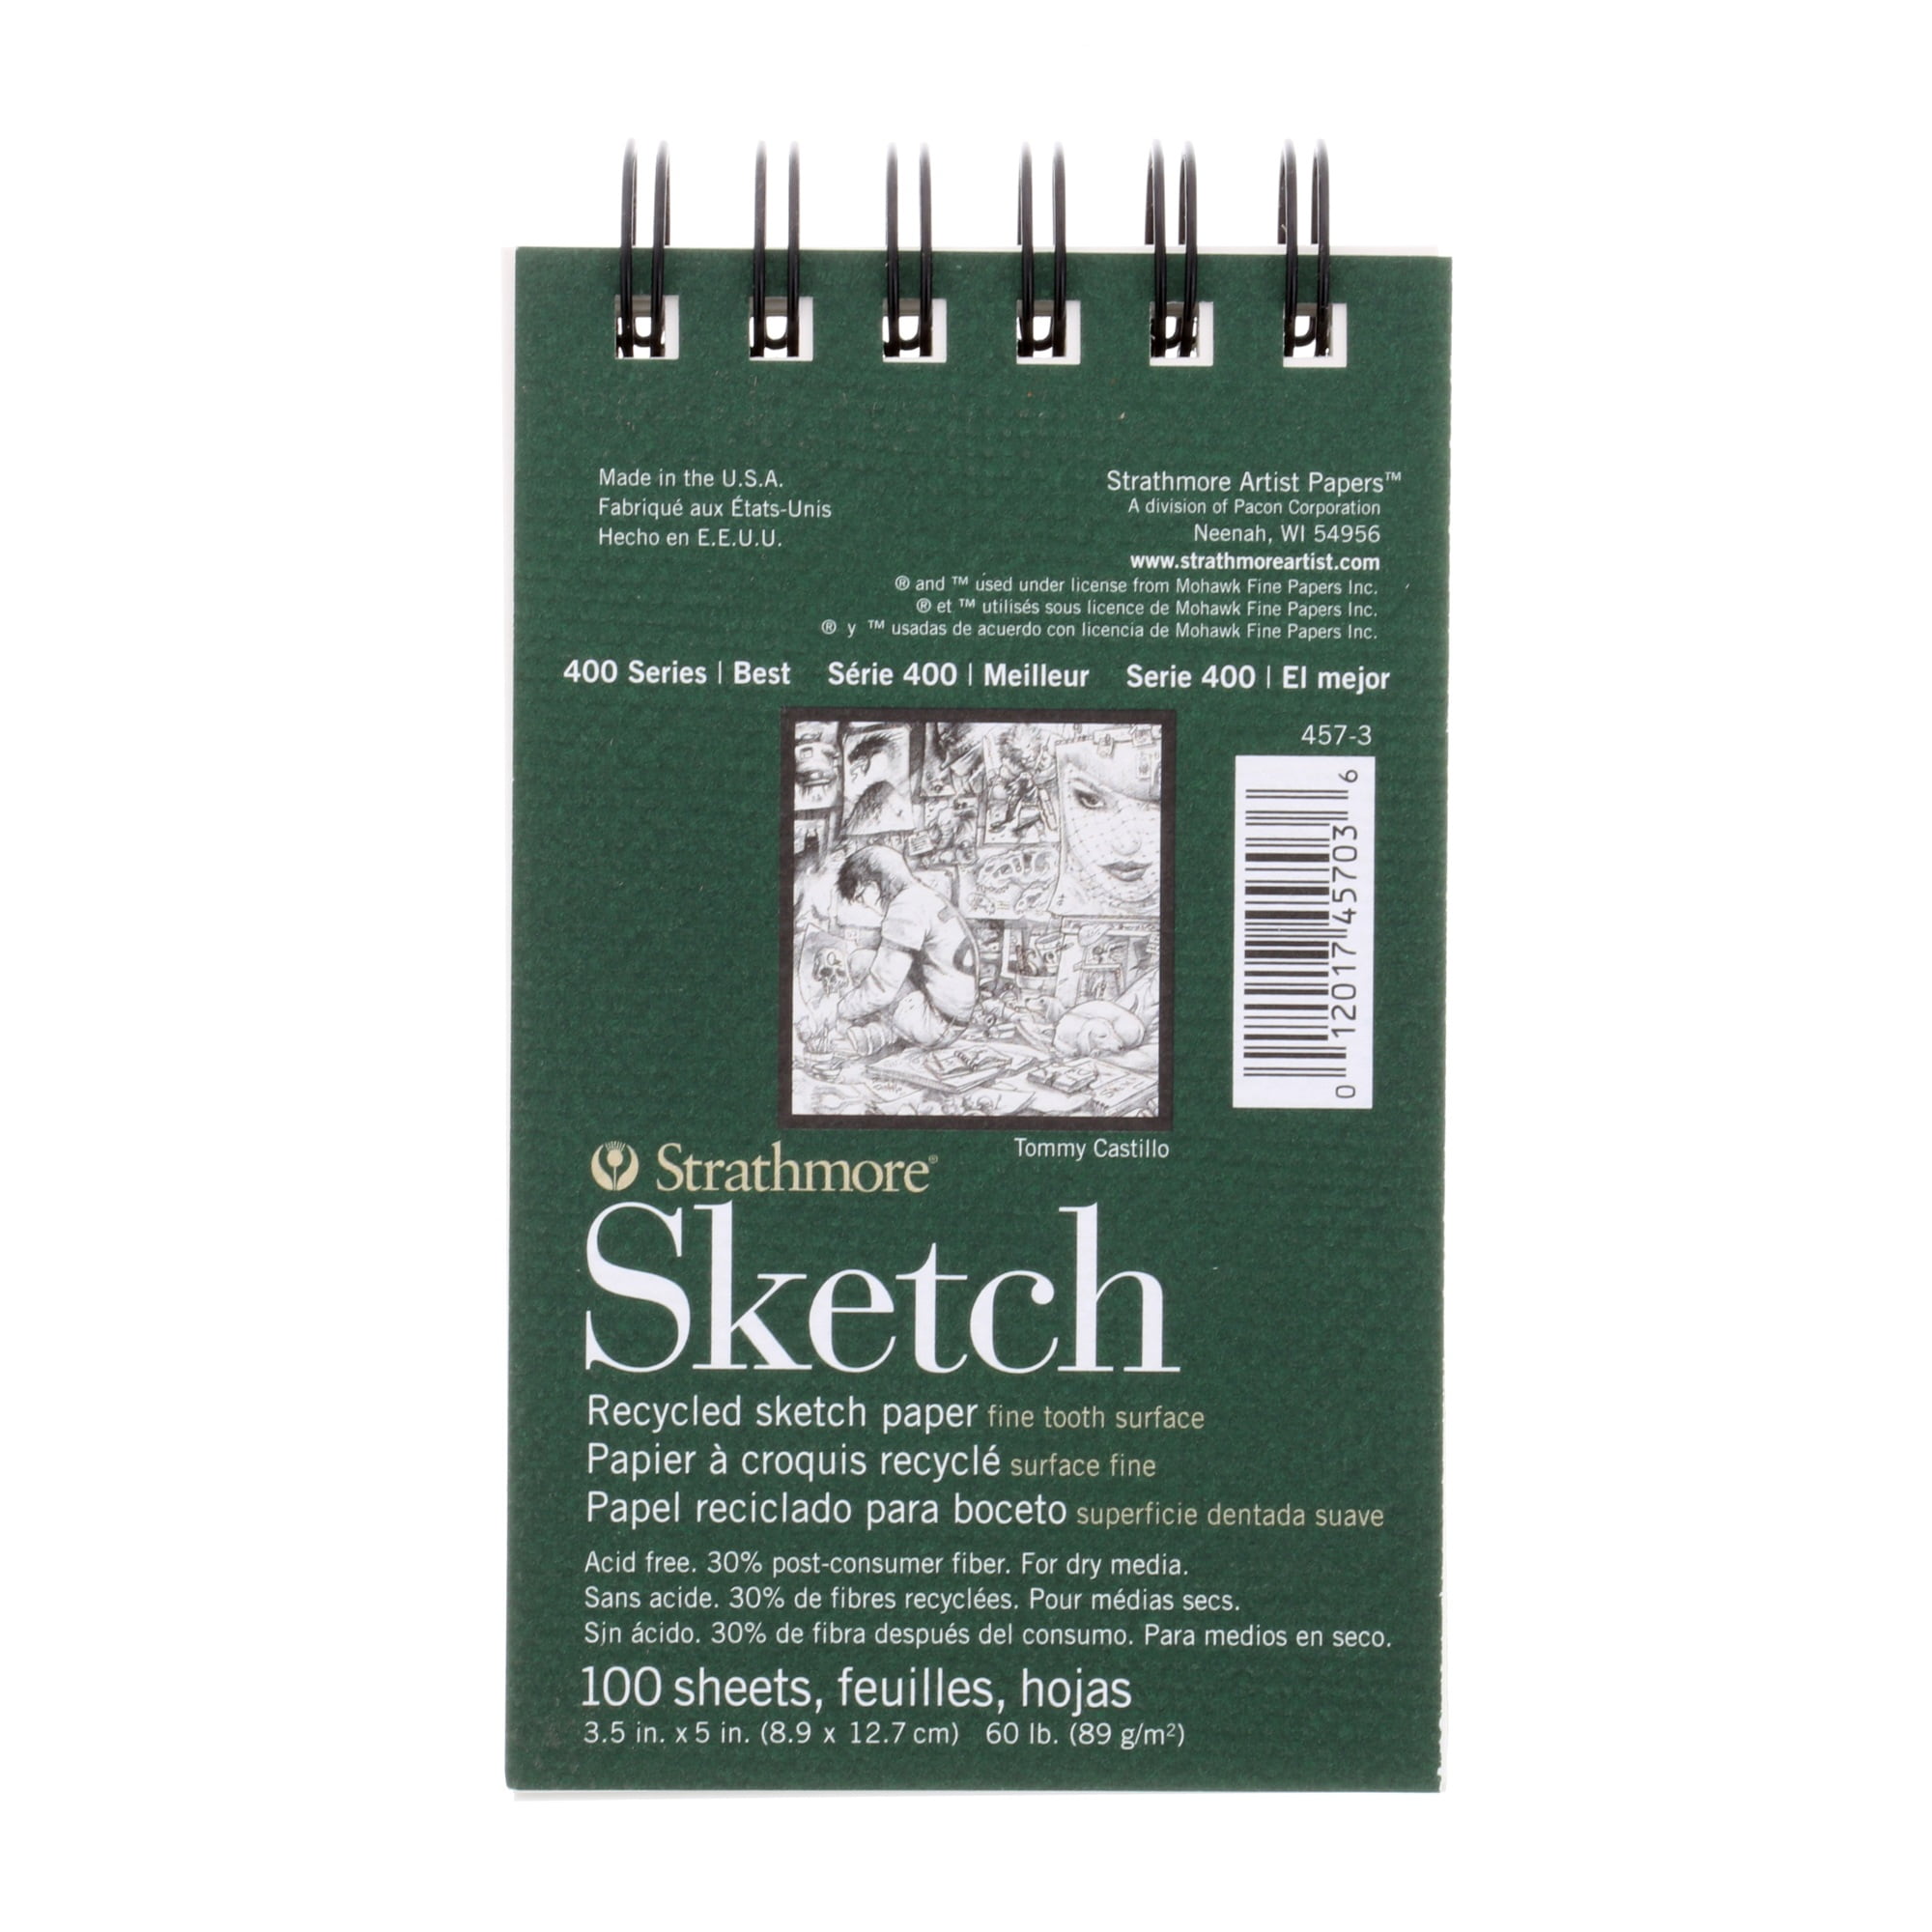  TEHAUX 3pcs Sketchbook Watercolor Sketch Pad Sketch Book for  Markers Sketch Books for Drawing Professional Sketch Book Painting Blank  Notebooks Memo Notepads Child Cardboard Thicken Set : Arts, Crafts & Sewing